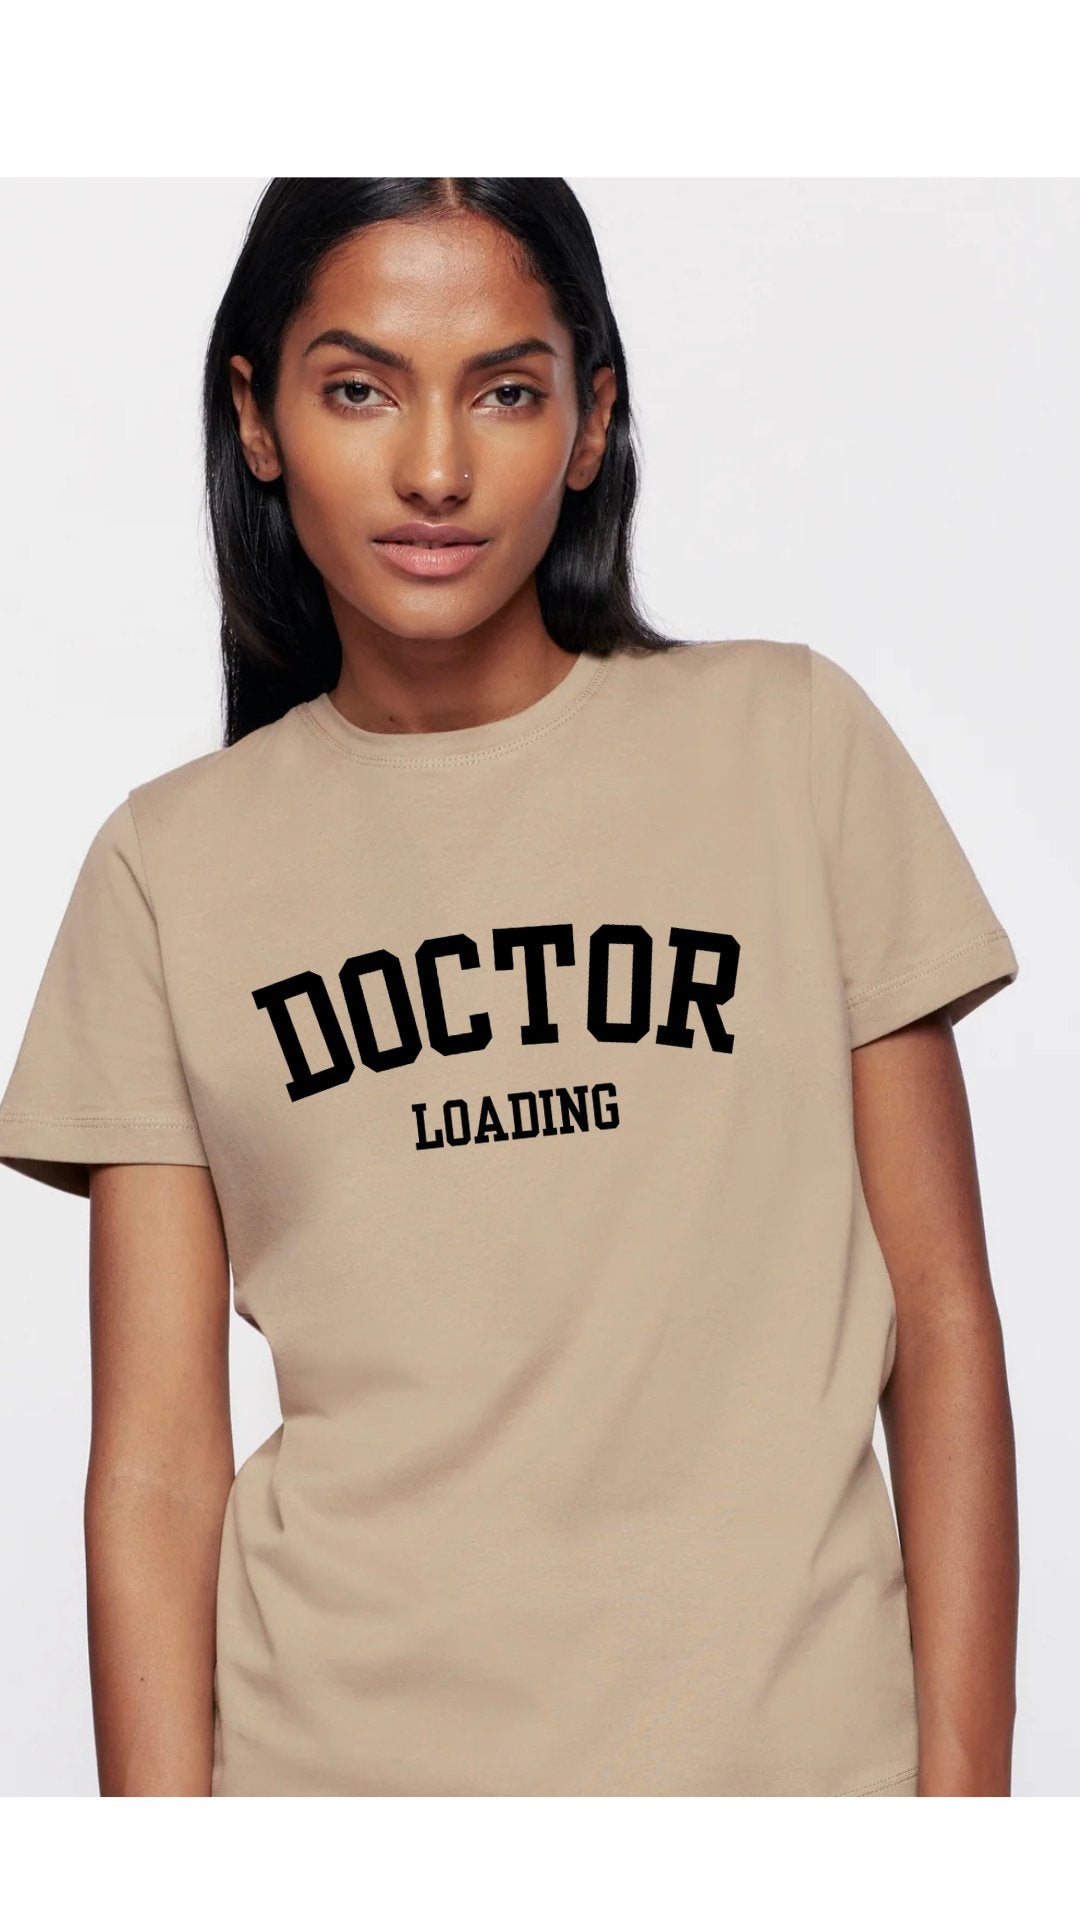 "Doctor Loading" Luxury Unisex T-shirt - The Woman Doctor